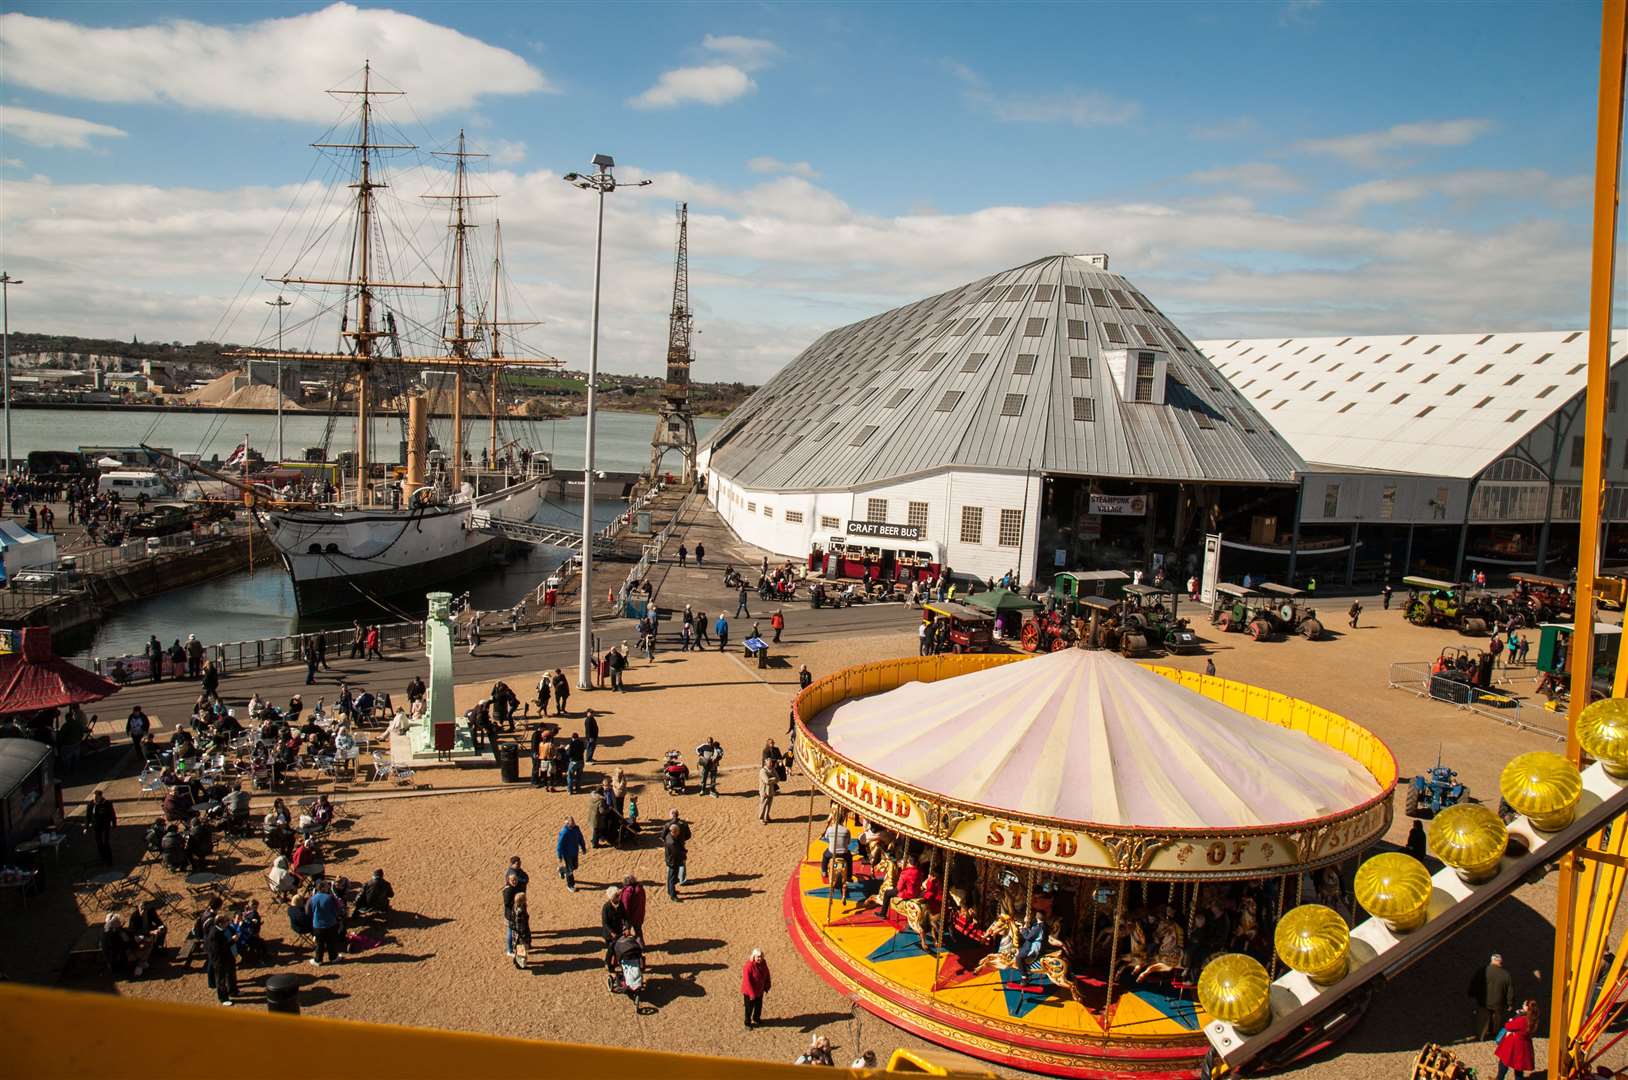 Chatham Historic Dockyard has been nominated for a national award for online activities for children during lockdown